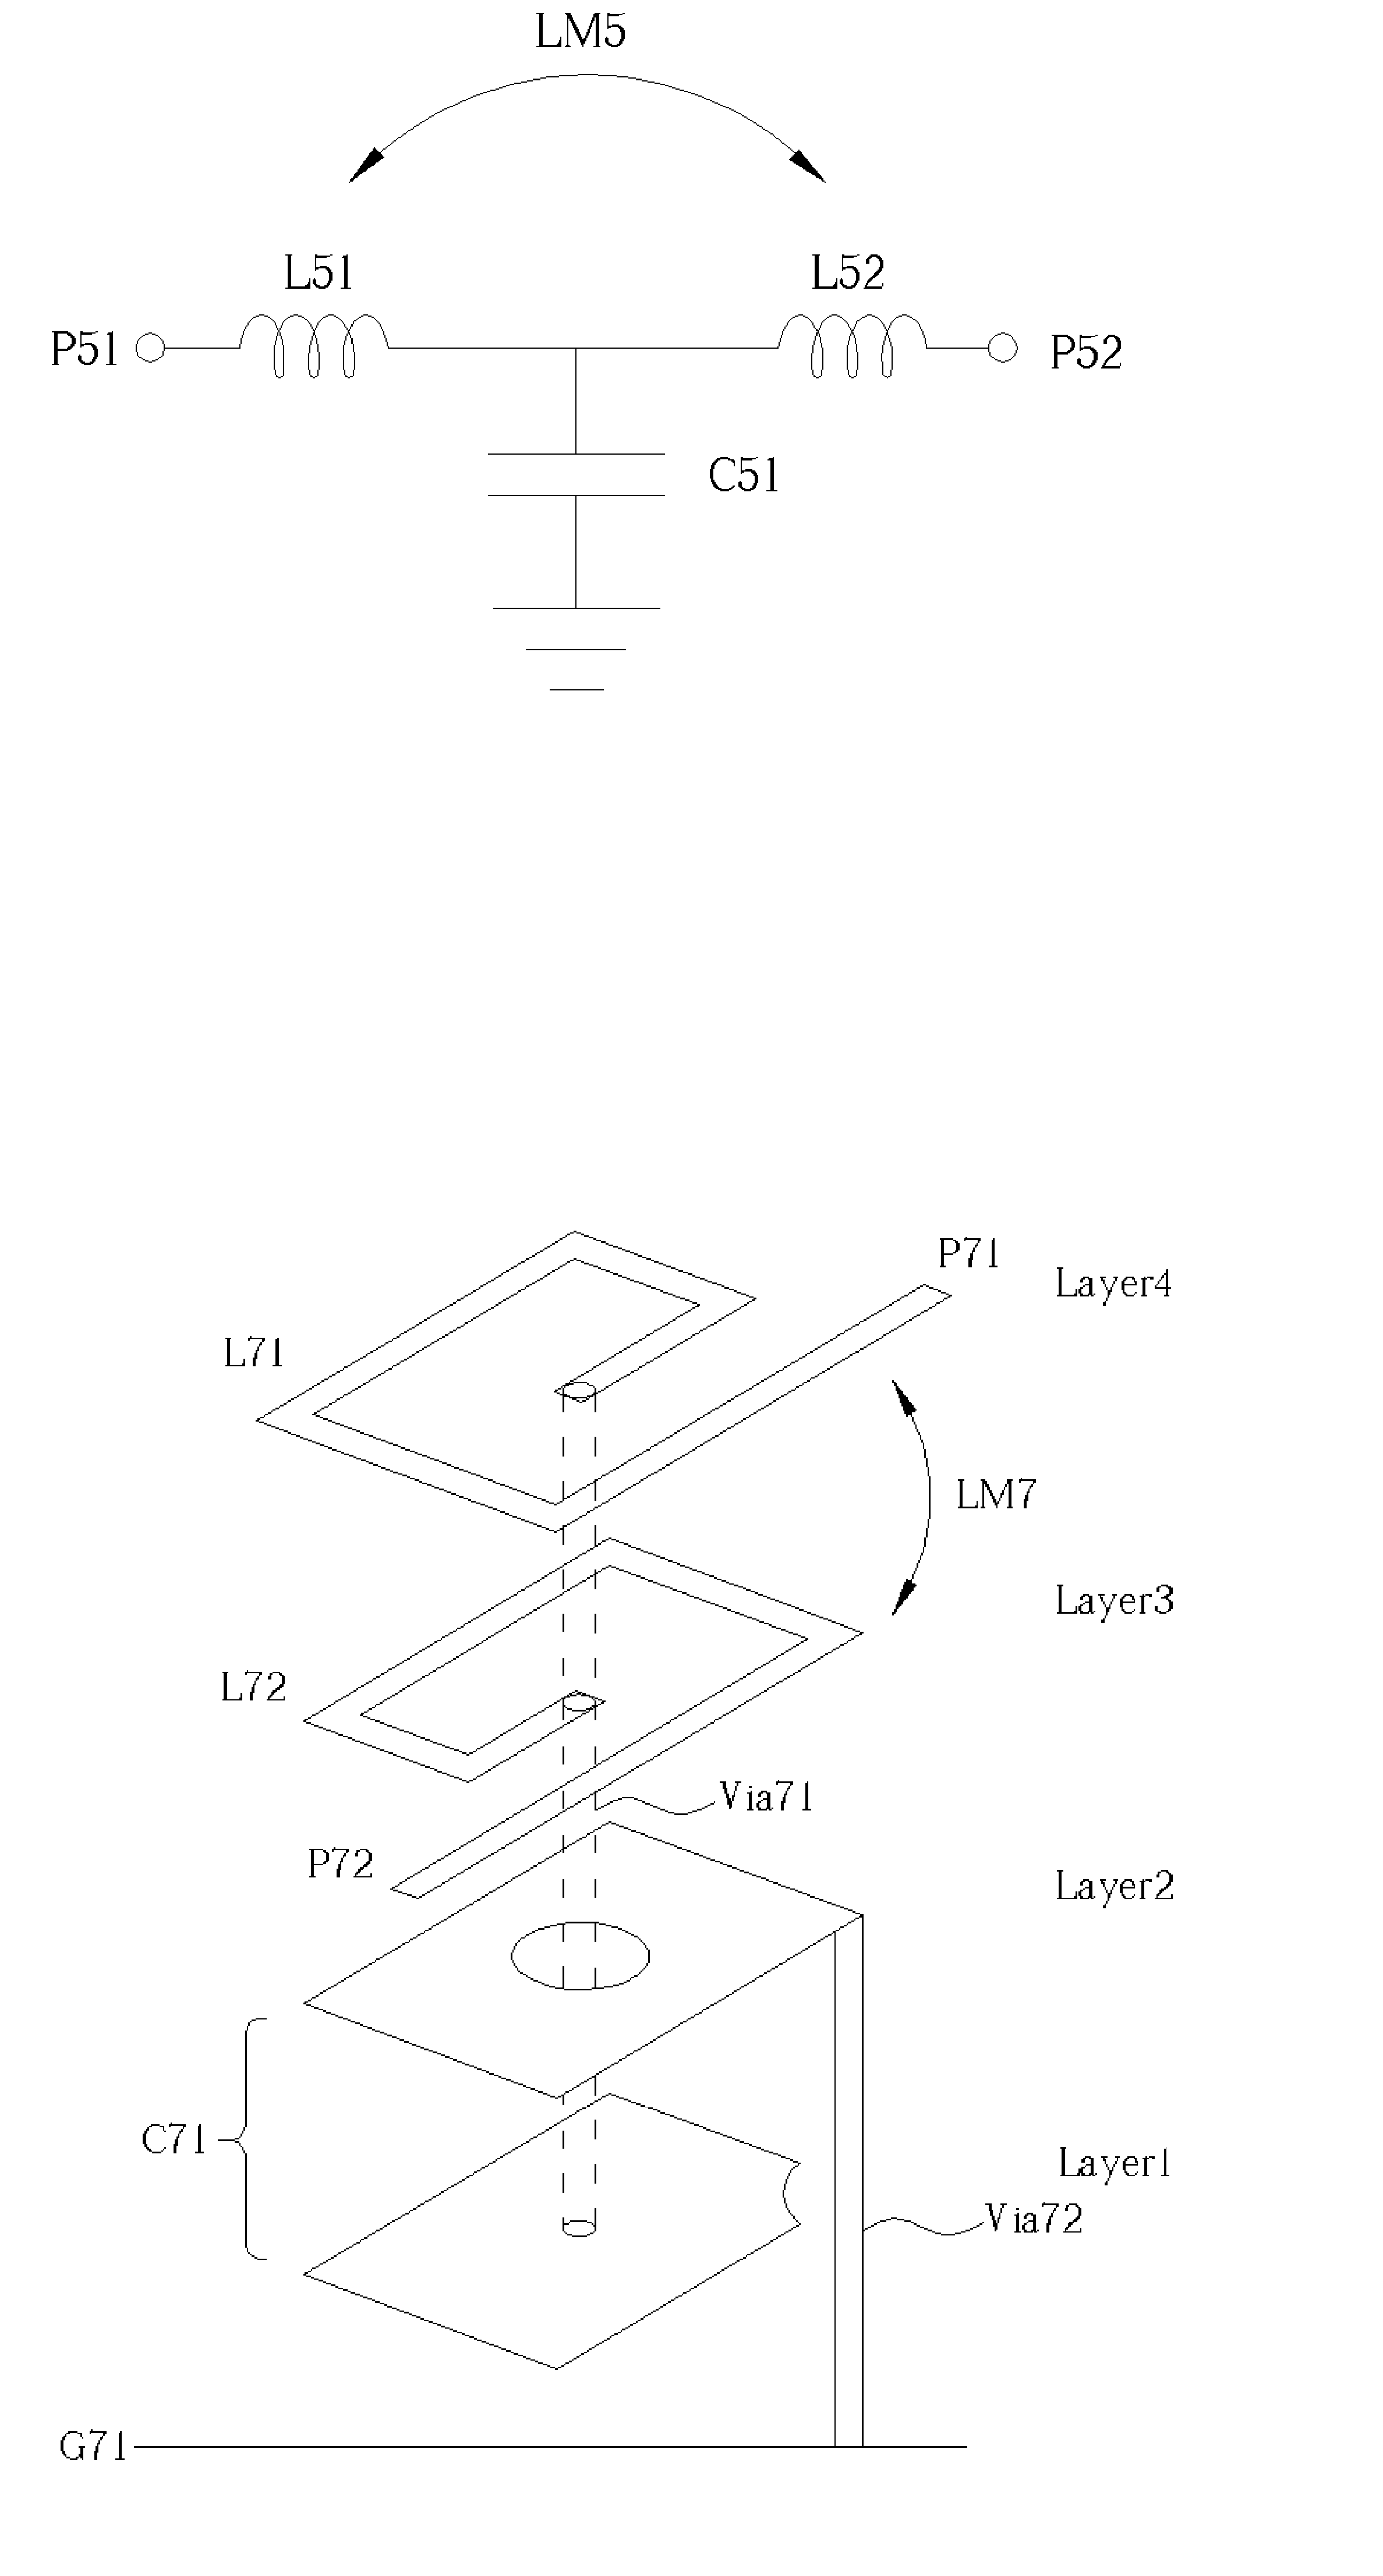 Lumped-element transmission line in multi-layered substrate